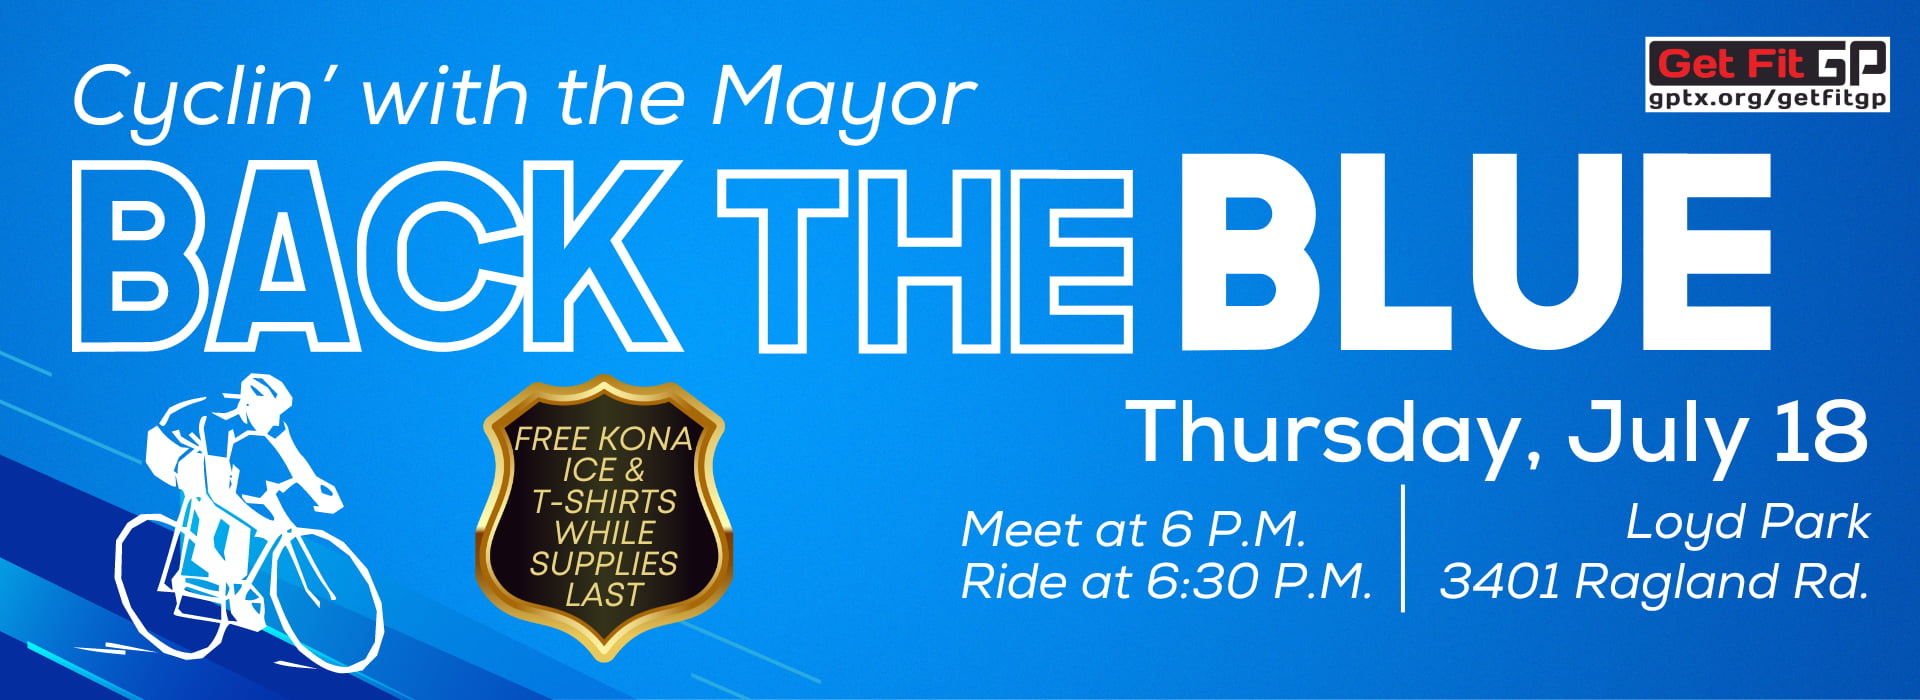 Back the Blue banner; event is on Thursday, July 18 at 6 p.m. at Loyd Park, 3401 Ragland Rd. 